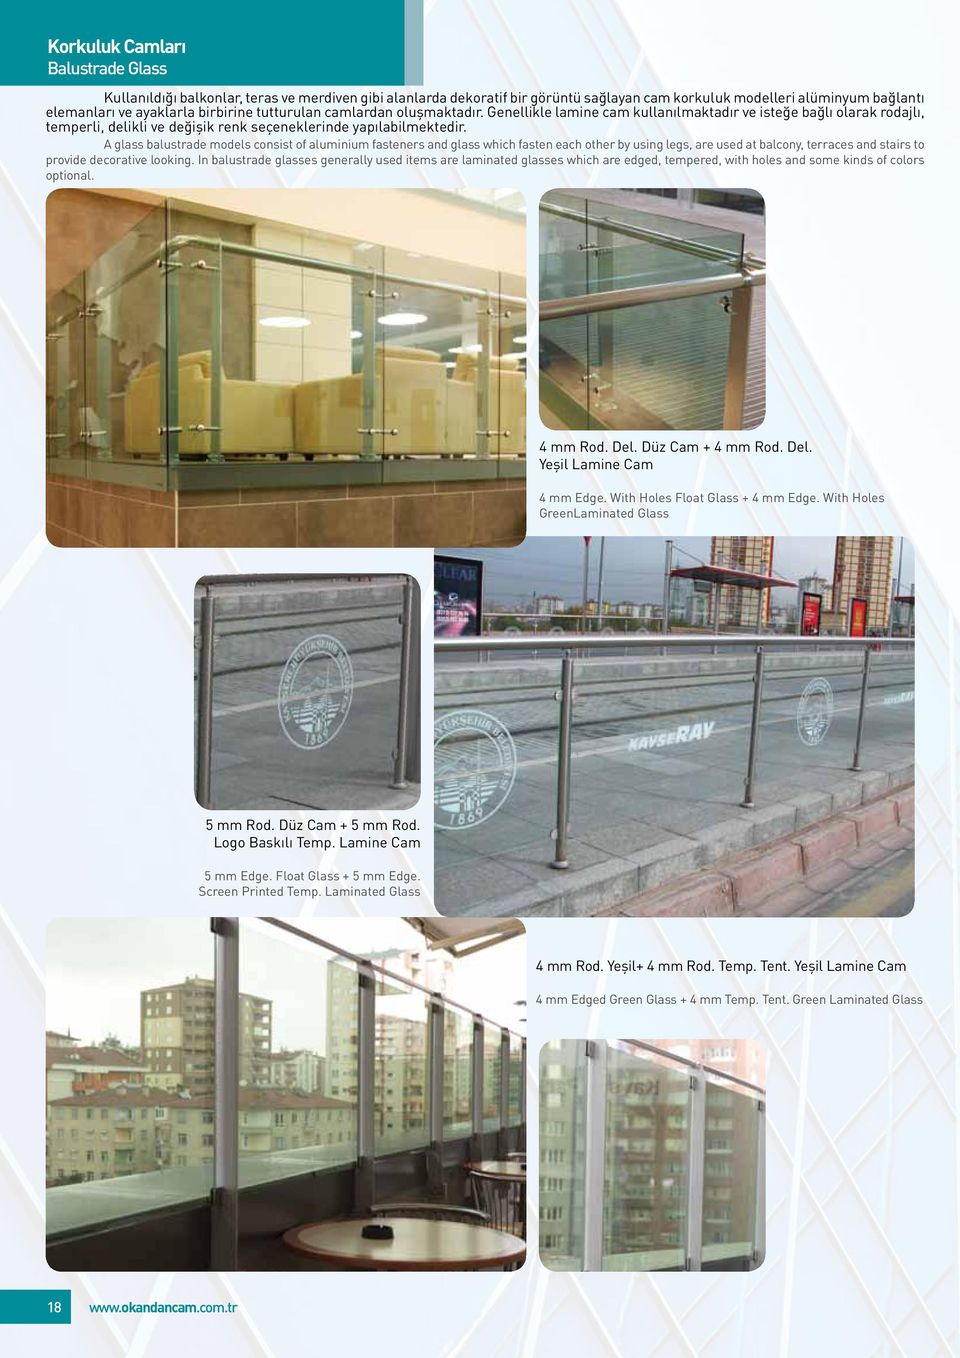 A glass balustrade models consist of aluminium fasteners and glass which fasten each other by using legs, are used at balcony, terraces and stairs to provide decorative looking.